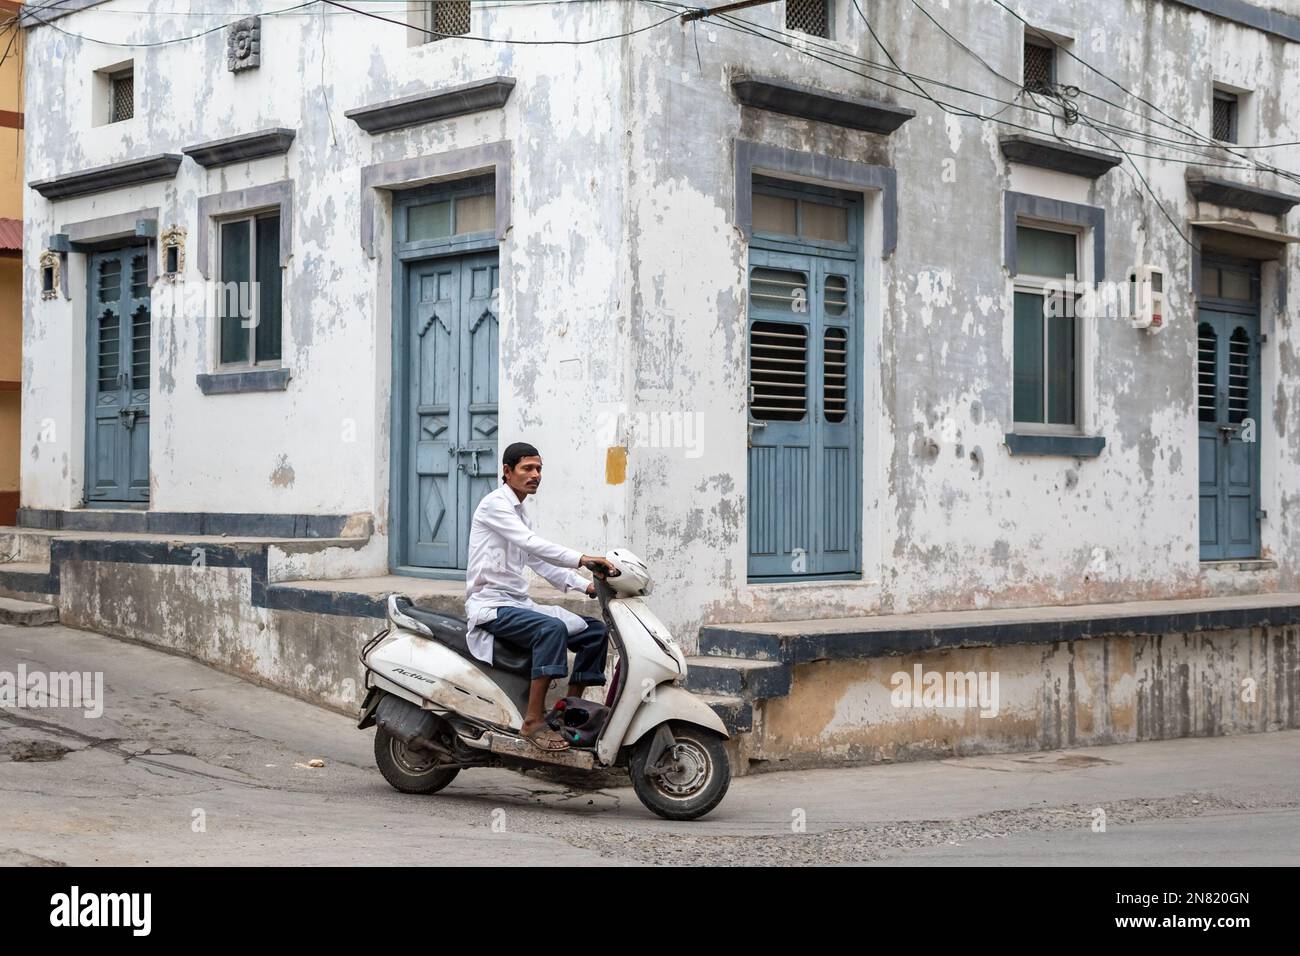 Diu, India - December 2018: A man riding a scooter bike on a street with old Portuguese era houses in the island town of Diu. Stock Photo